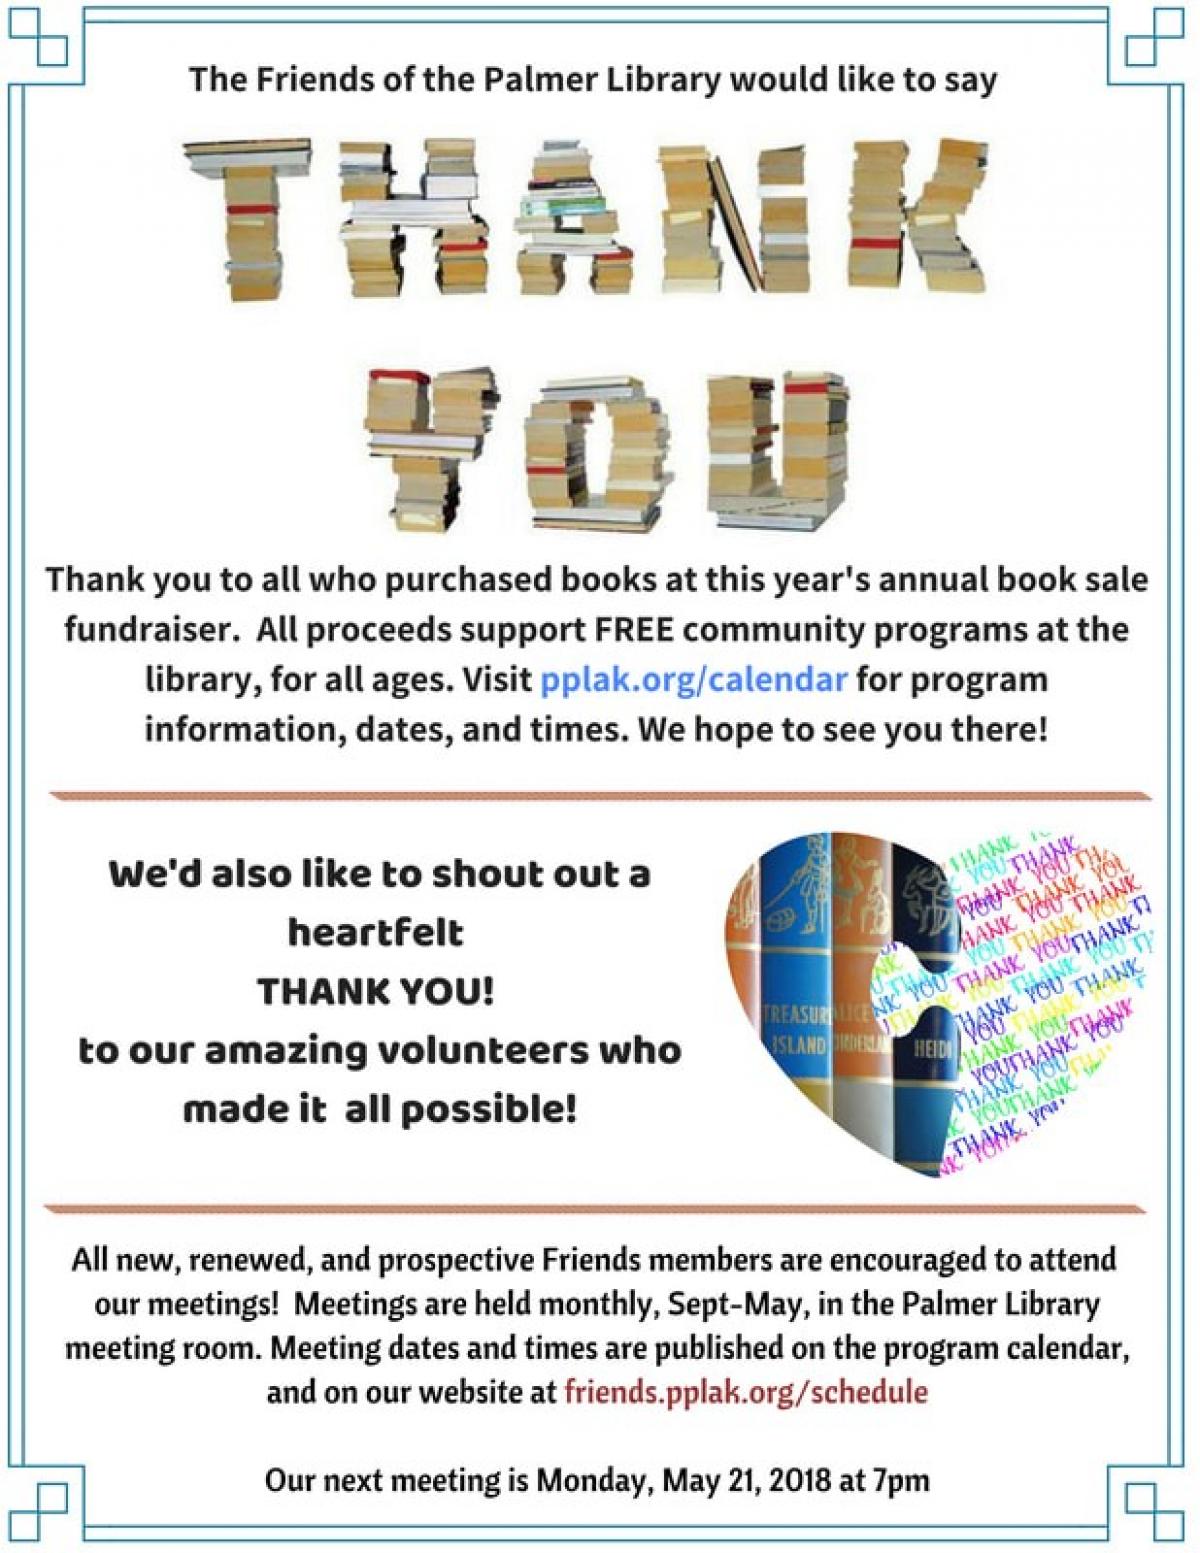 The Friends of the Palmer Library would like to say Thank You